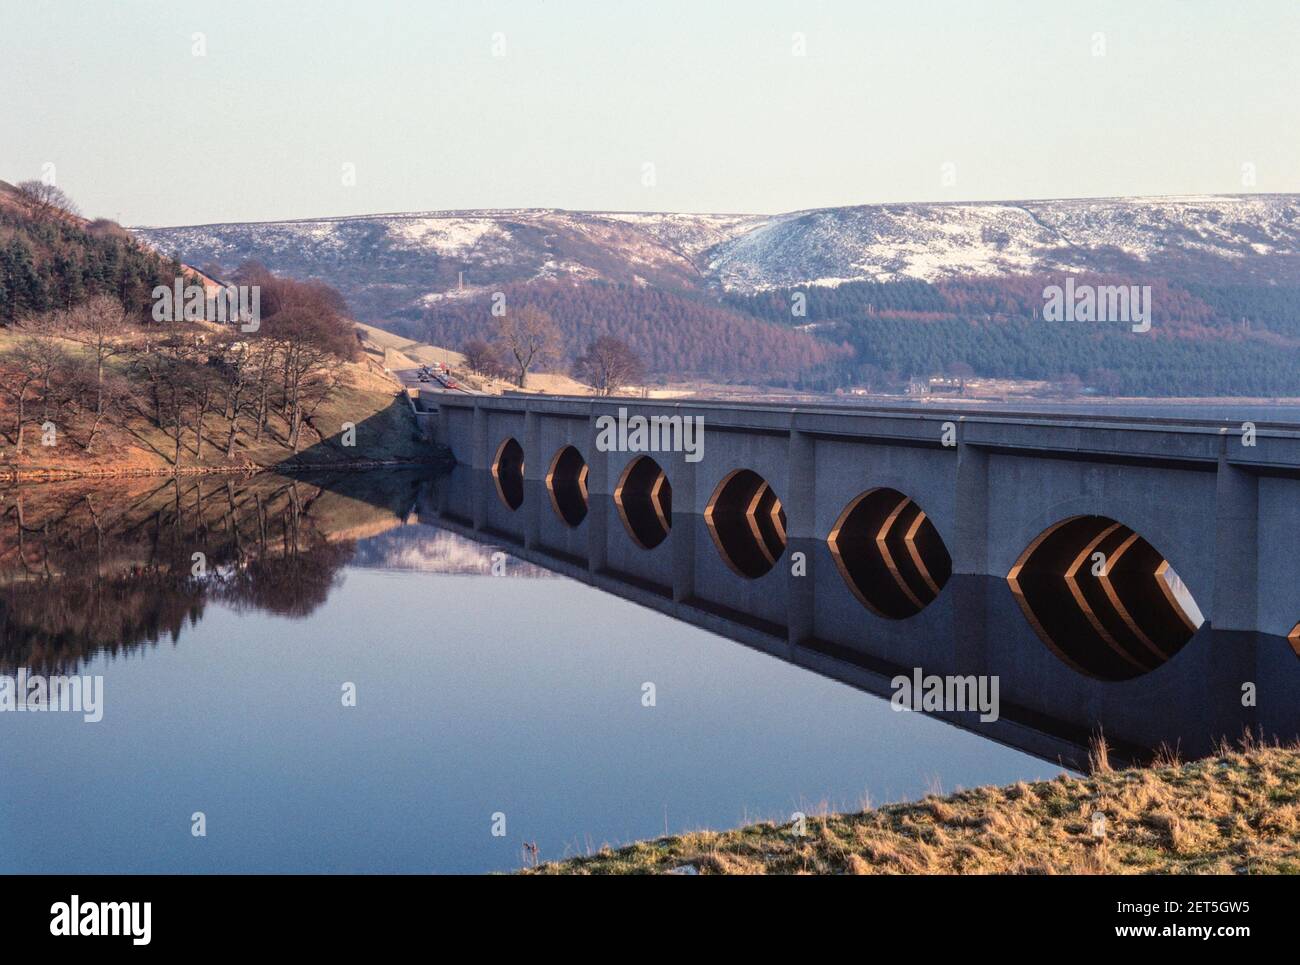 1979 - Ashopton viaduct and reflection of the road bridge in the water. The viaduct bridge carries the A57 road over Ladybower reservoir onto the Snake Pass Derbyshire Peak district national park Derbyshire England UK GB Europe, a57 road peak district Stock Photo